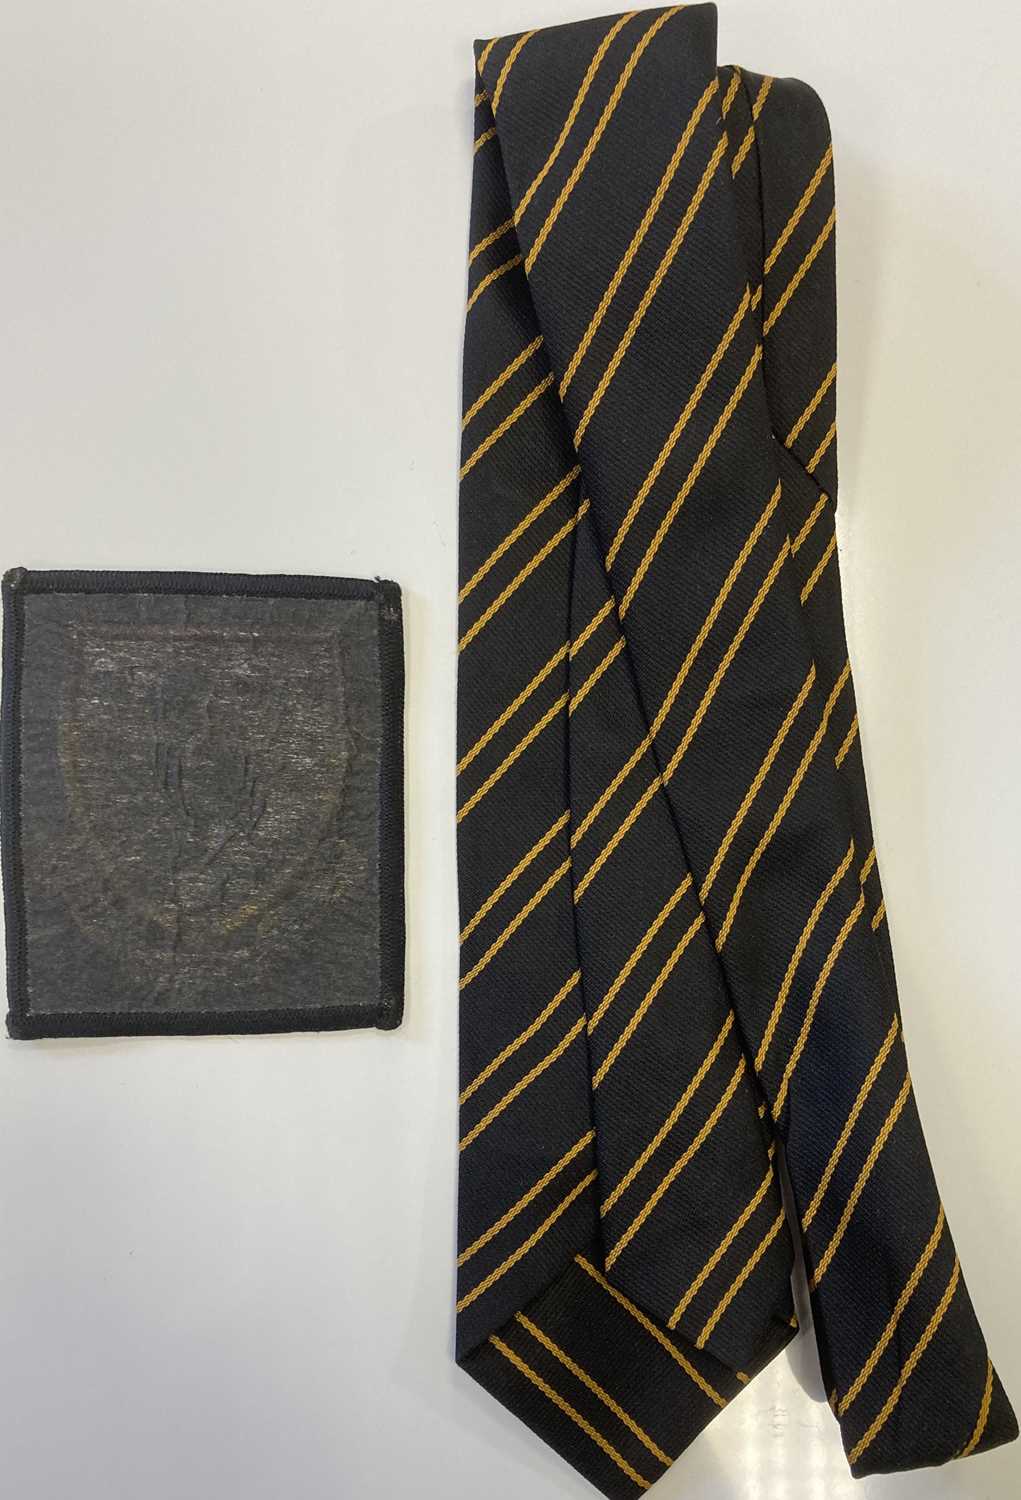 Lot 174 - THE BEATLES QUARRY BANK SCHOOL BADGE AND TIE